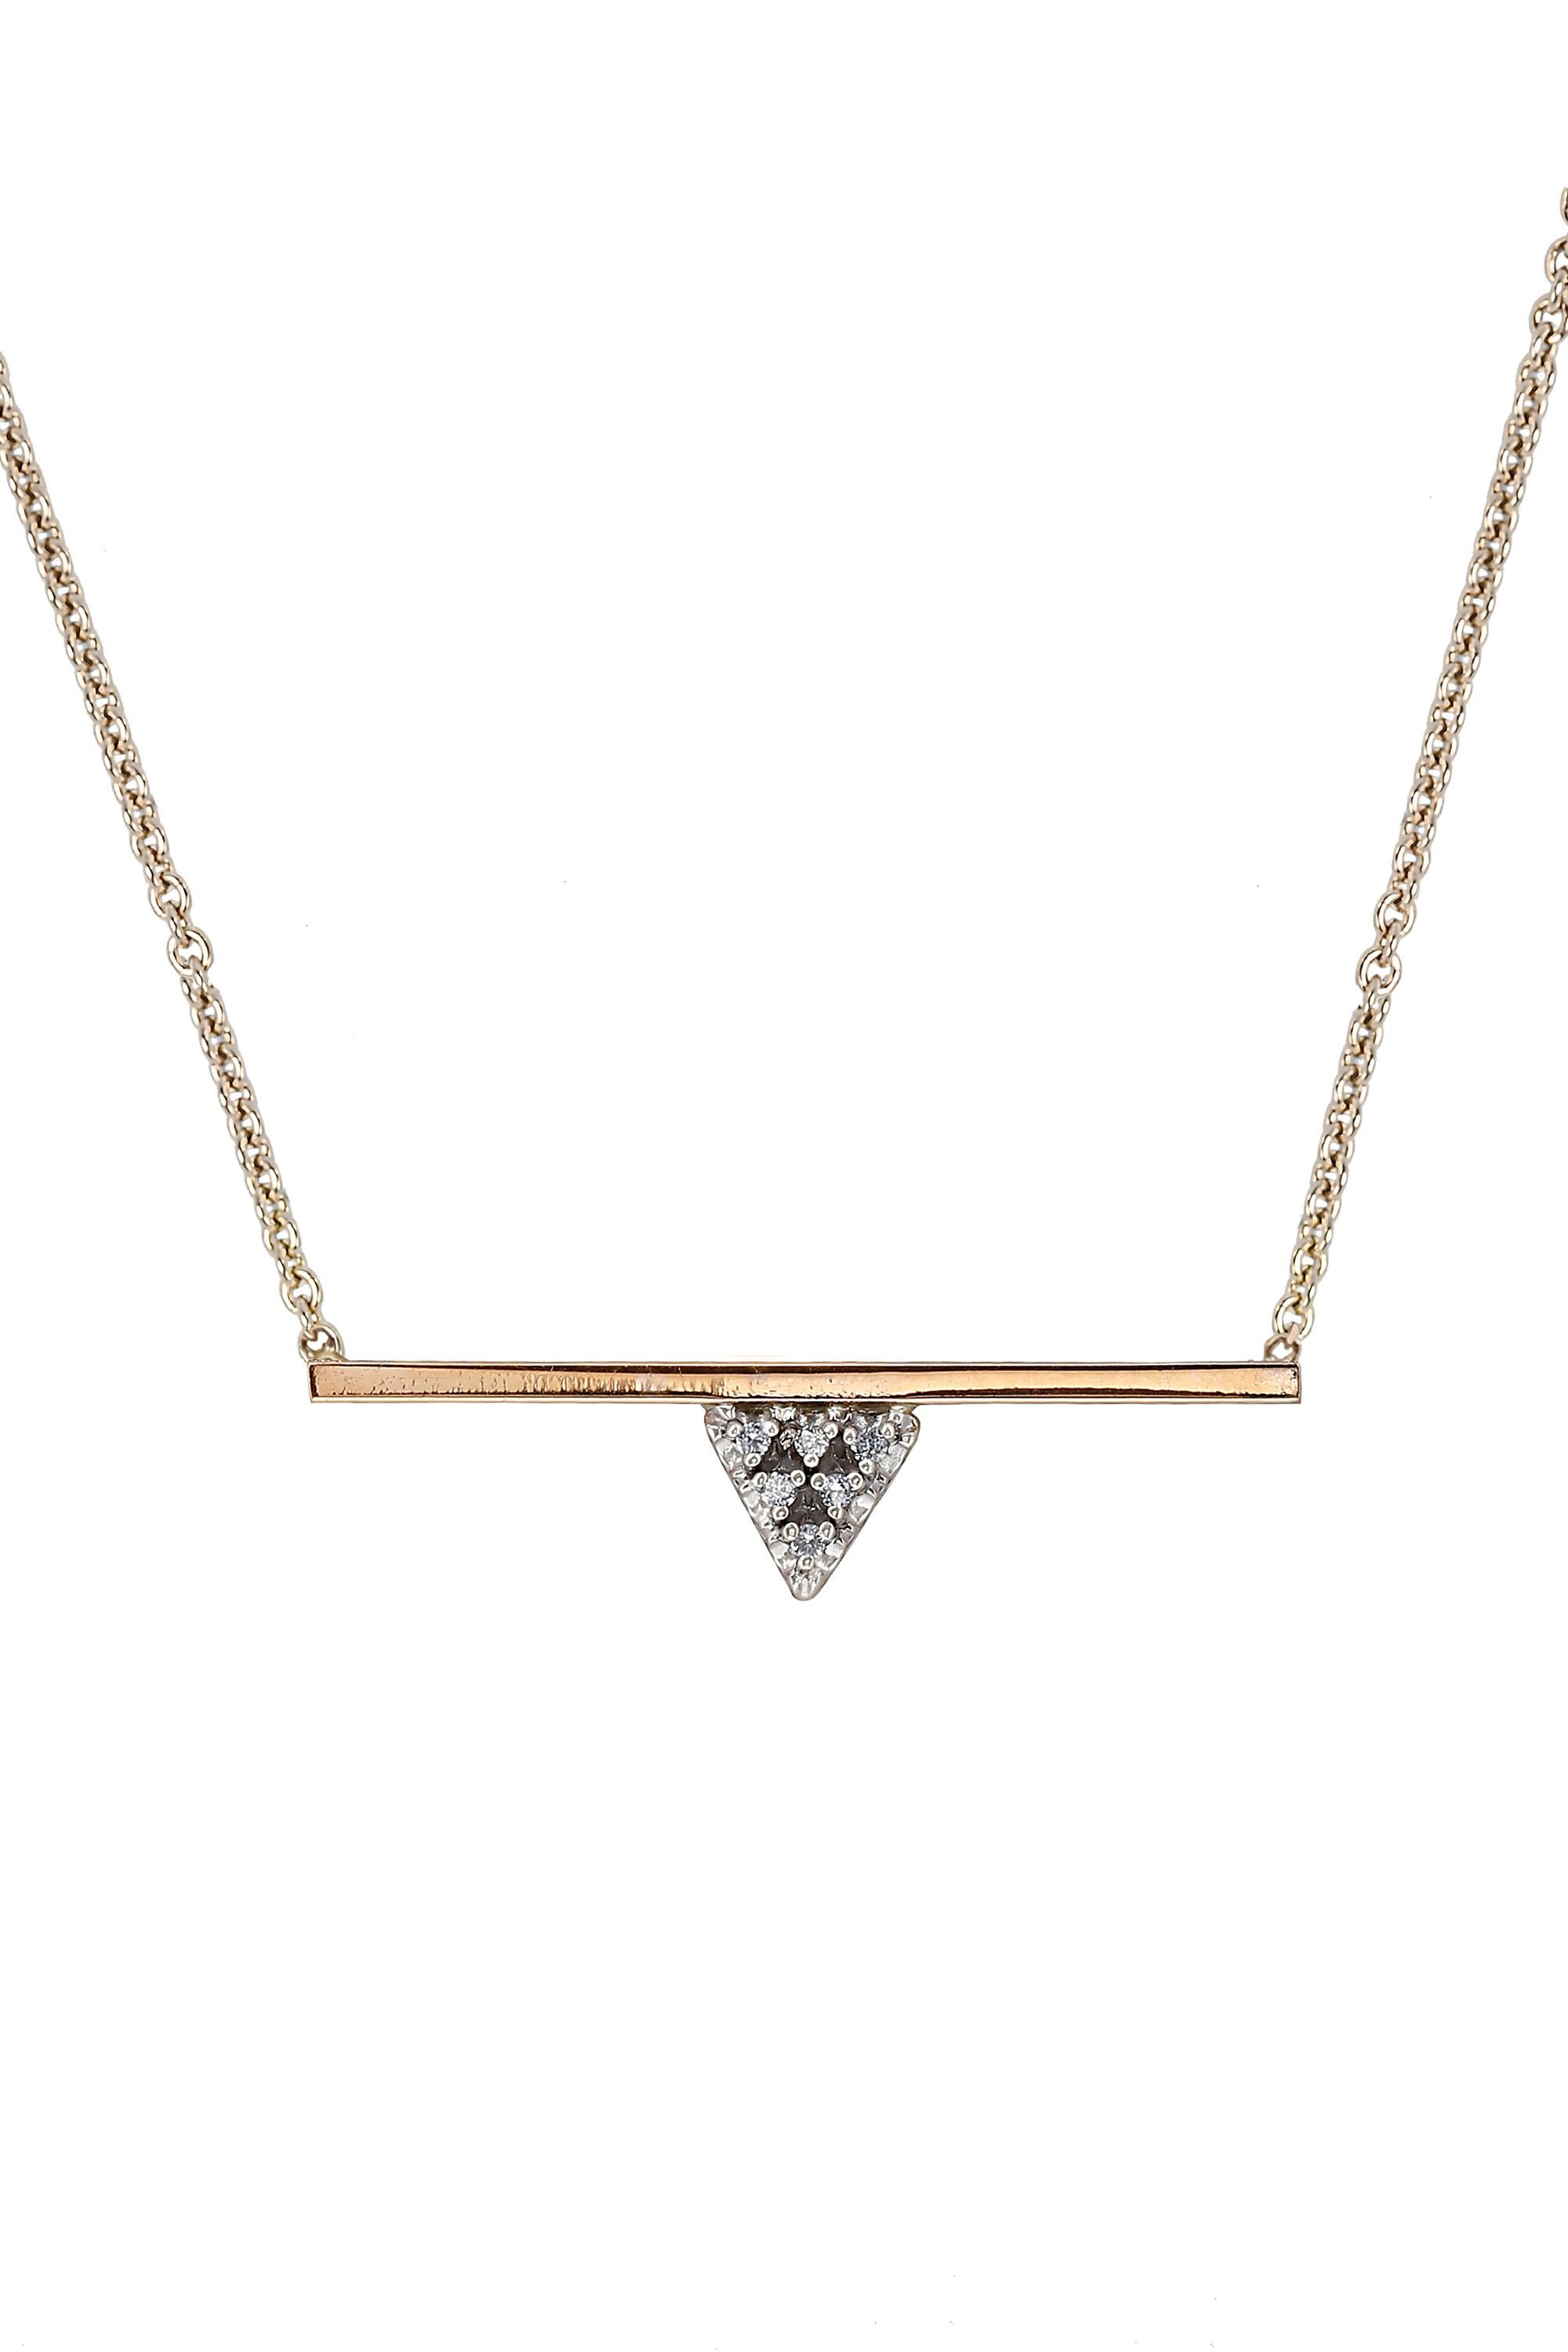 This modern and stunning 14K Yellow gold bar diamond triangle necklace is designed by Zoe Chicco. This bar pendant necklace features a 30mm sized 14k yellow gold bar pendant with 6 round brilliant cut white diamonds weighing approx. 0.06ctw.